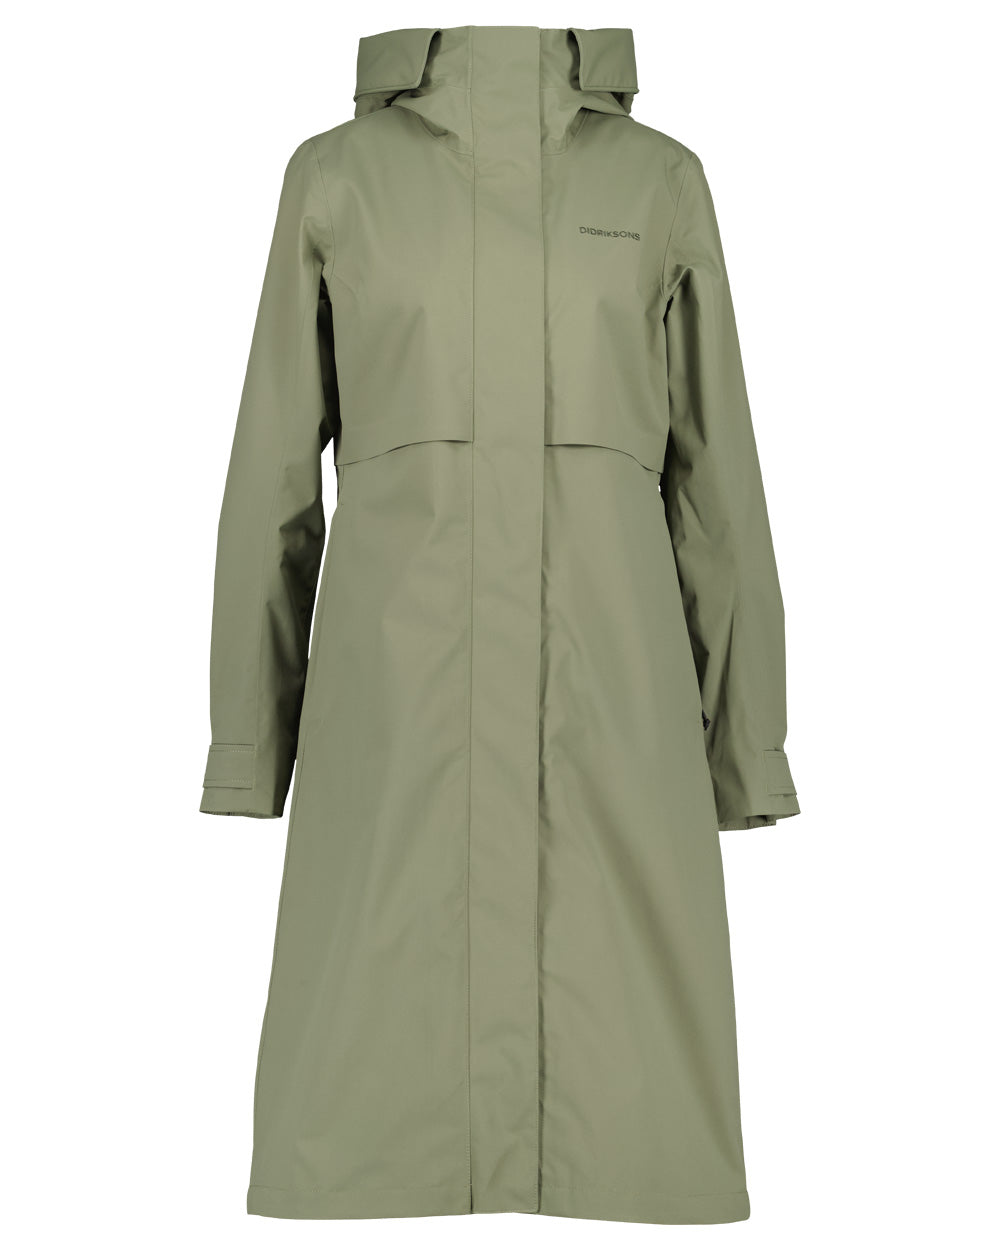 Dusty Olive coloured Didriksons Womens Parka on White background 